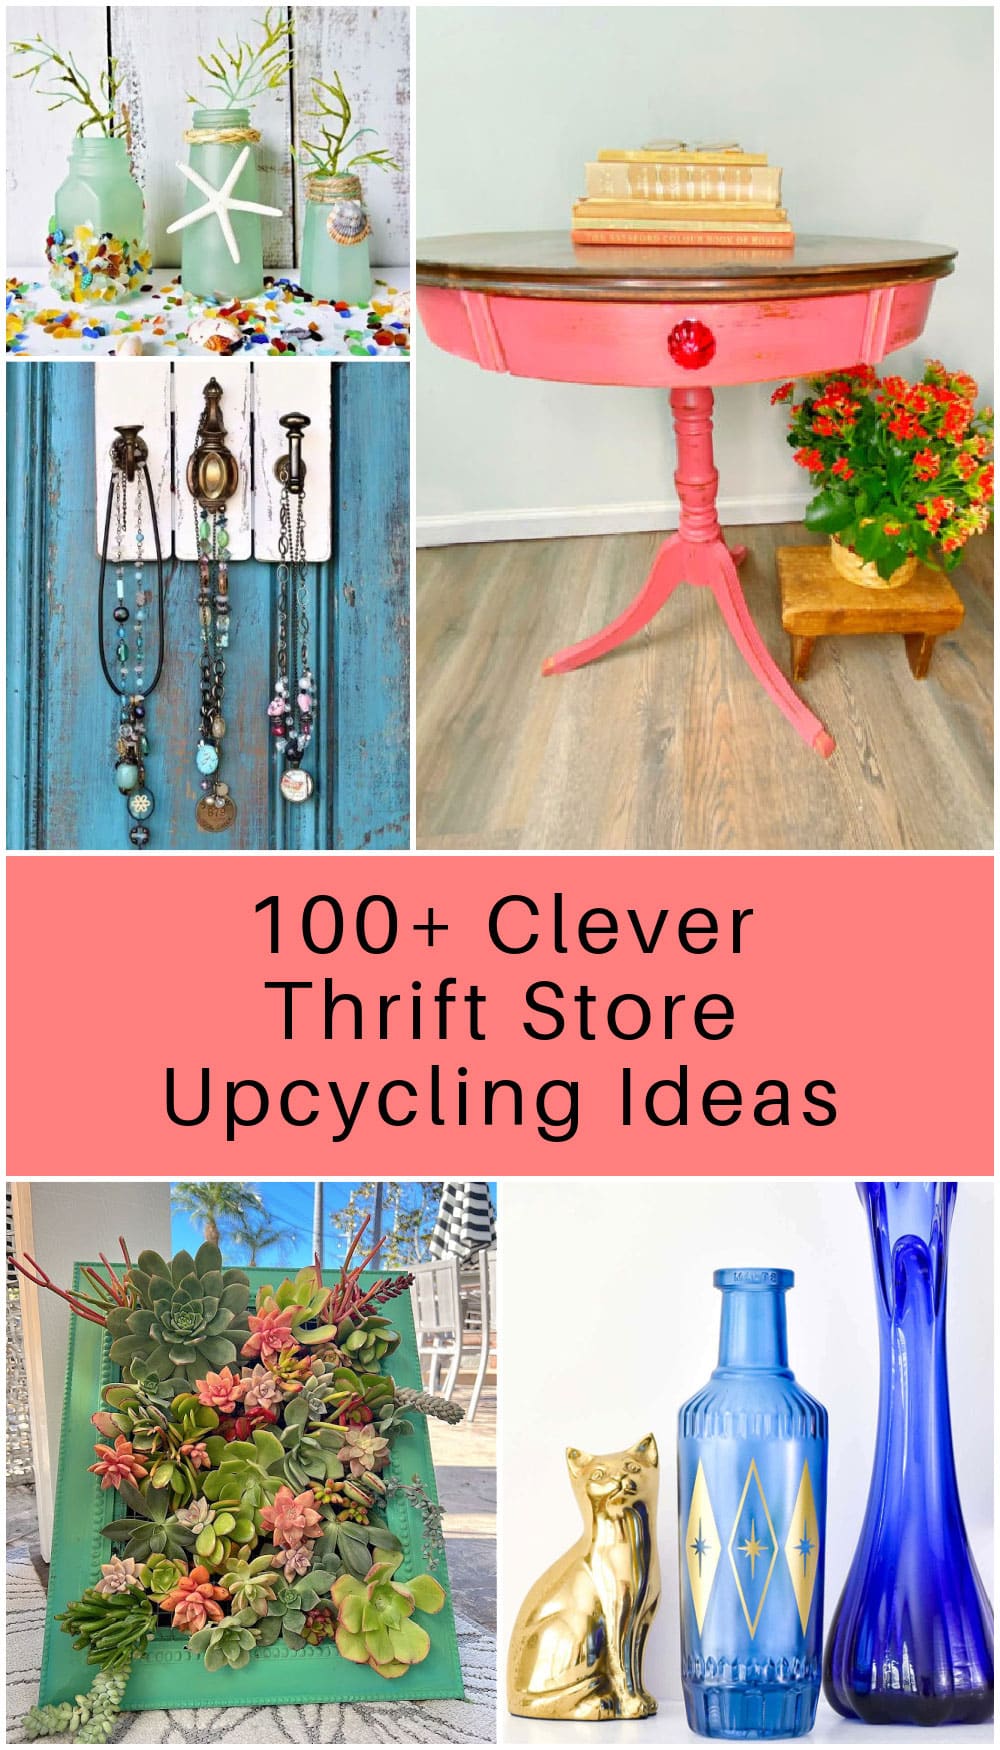 The 100 best thrift store upcycling ideas from the past year! Showing a collage of fun and colorful upcycling porjects all made with finds from secondhand stores. 